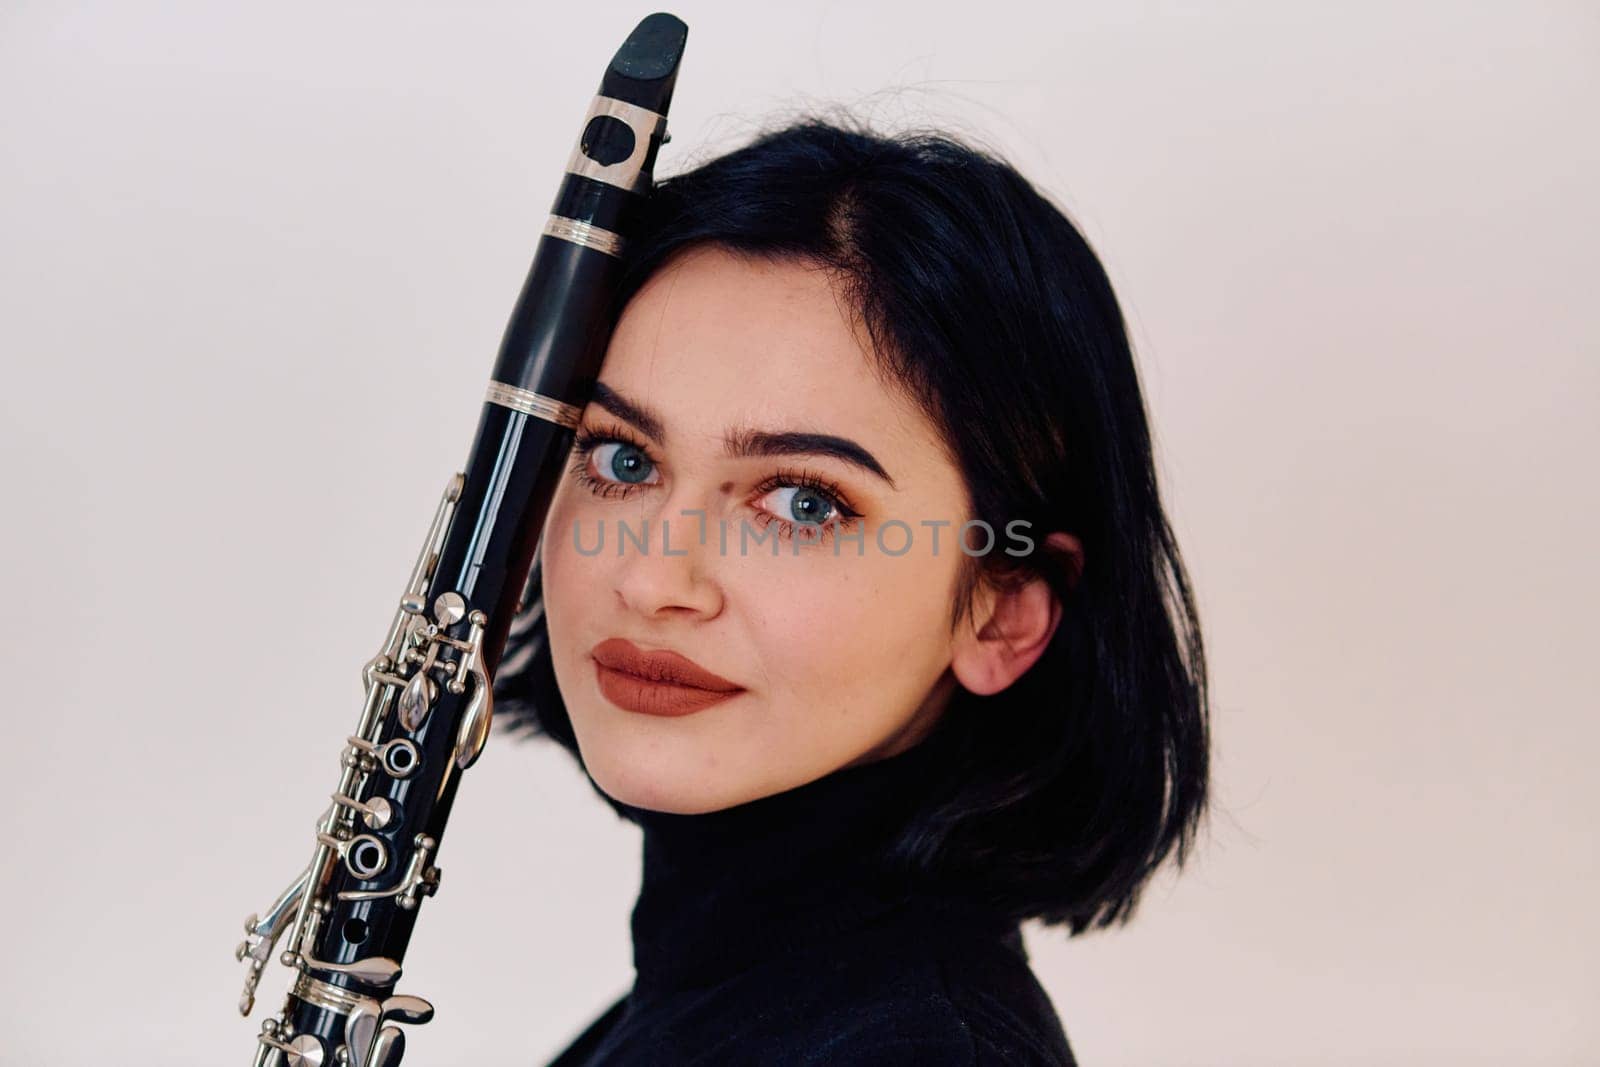 A talented brunette musician showcases her artistry as she gracefully holds and plays the clarinet against a pristine white background